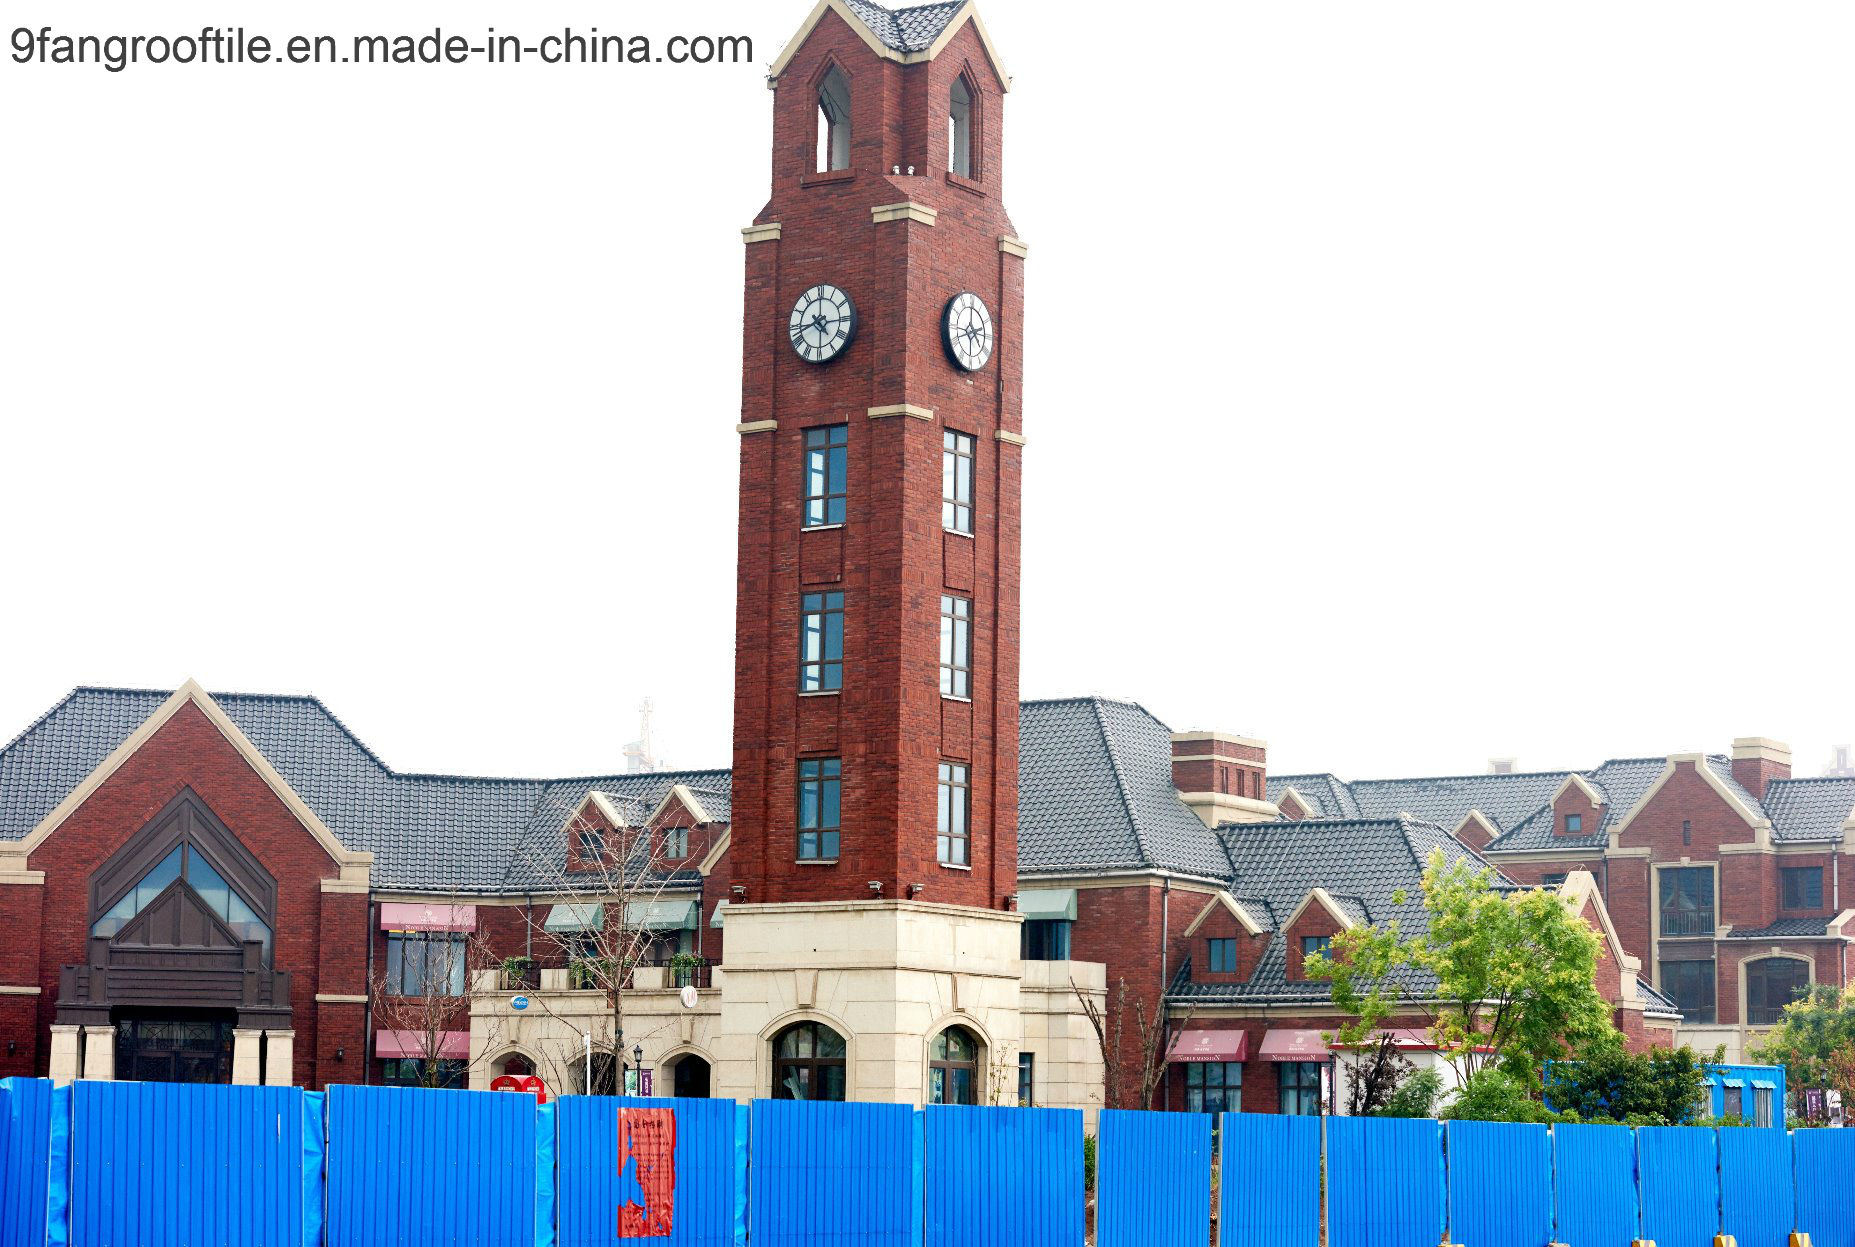 Building Materials, Spanish Roof Tile Project Case, Roofing Factory Made